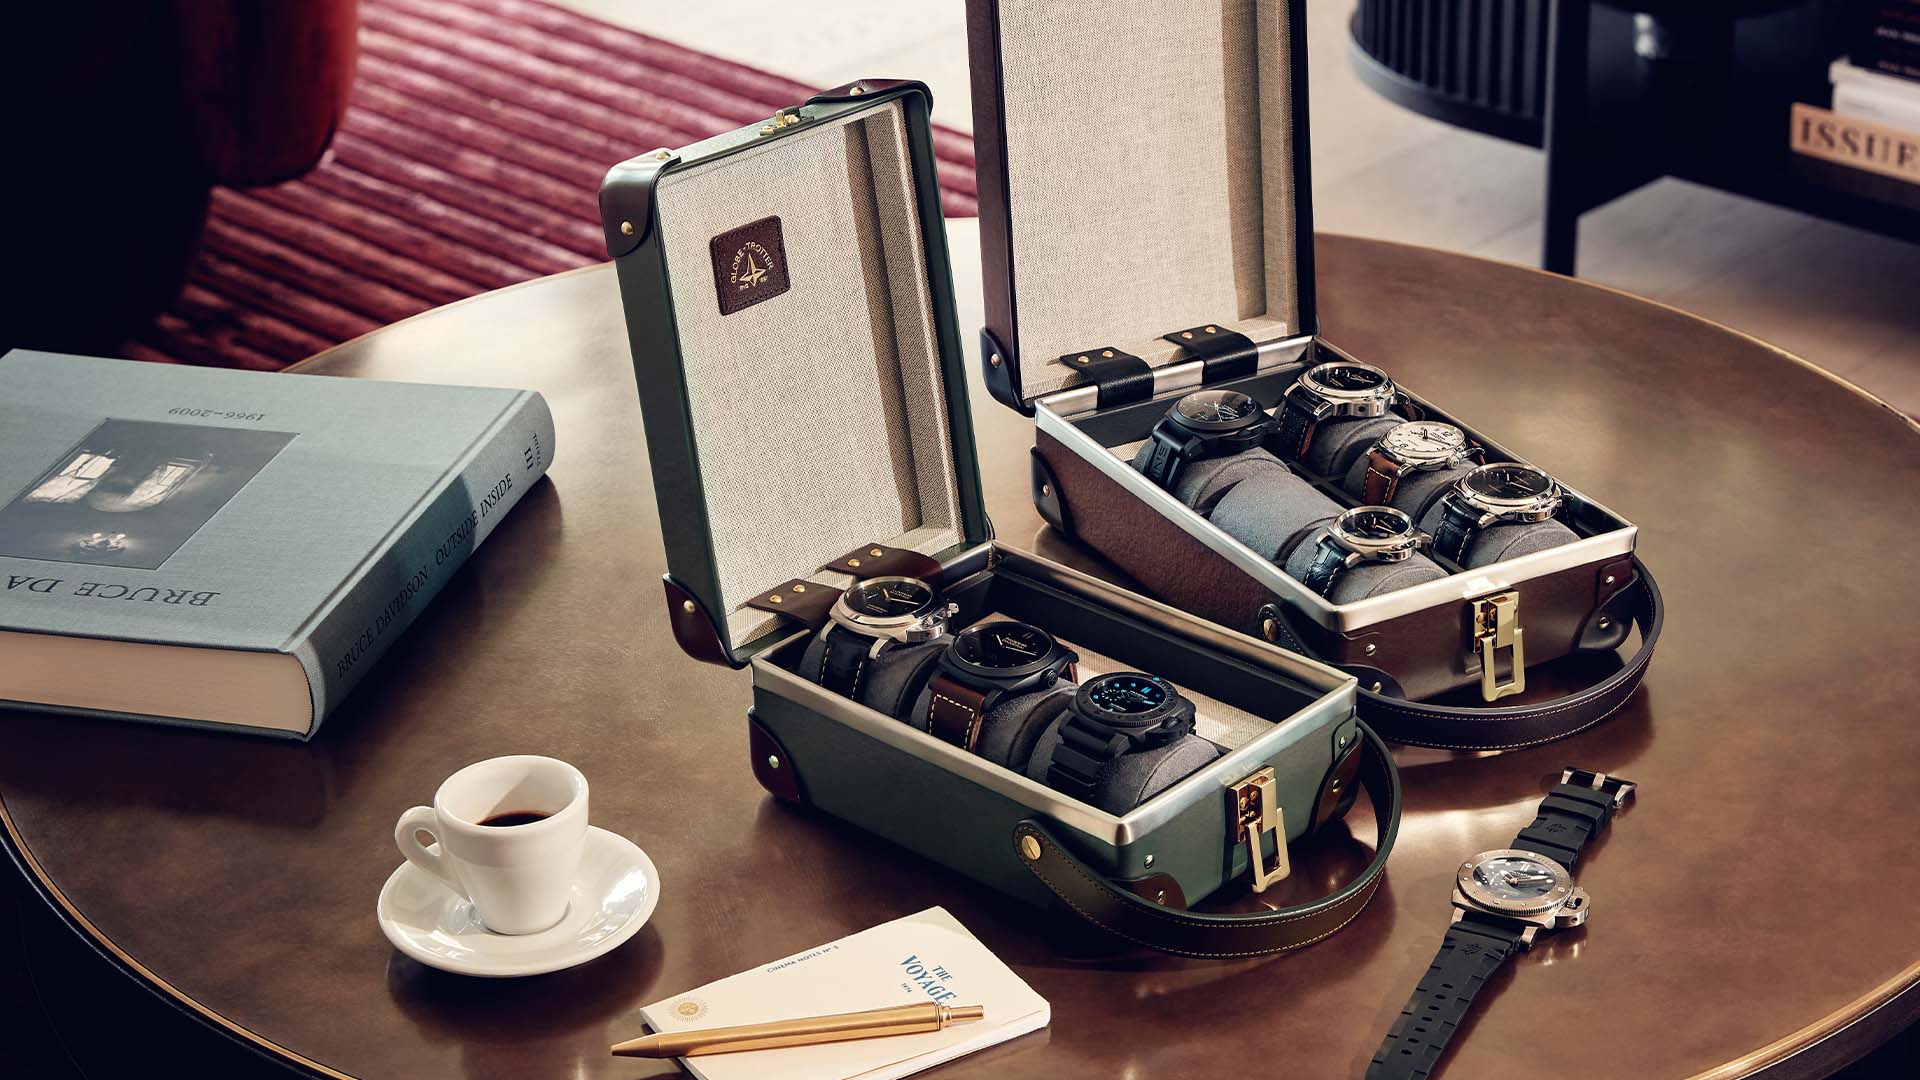 Time After Time: Watch Cases - GLOBE-TROTTER